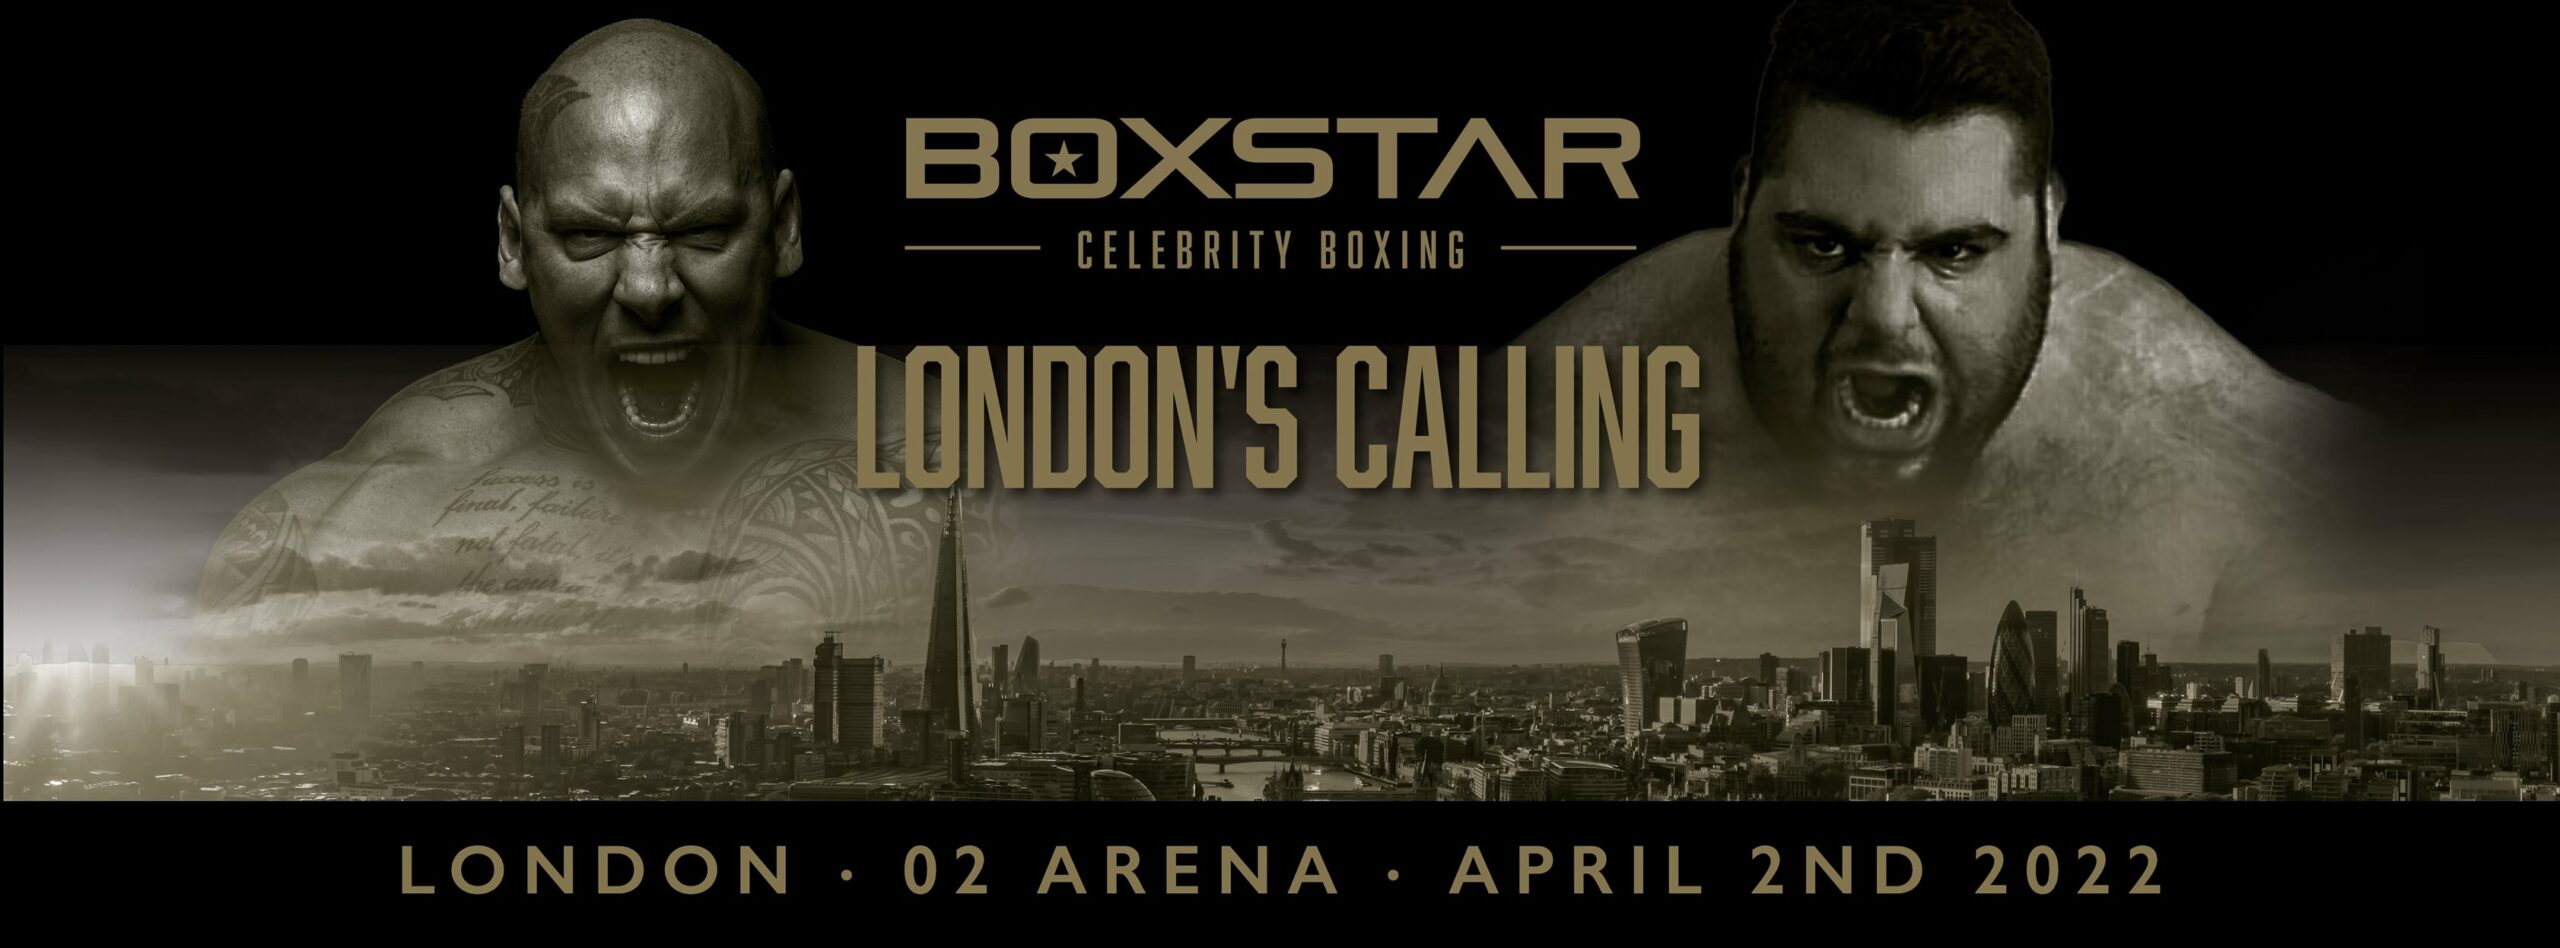 2022 Will See The Biggest Celebrity Boxing Event Will Be Coming To The O2